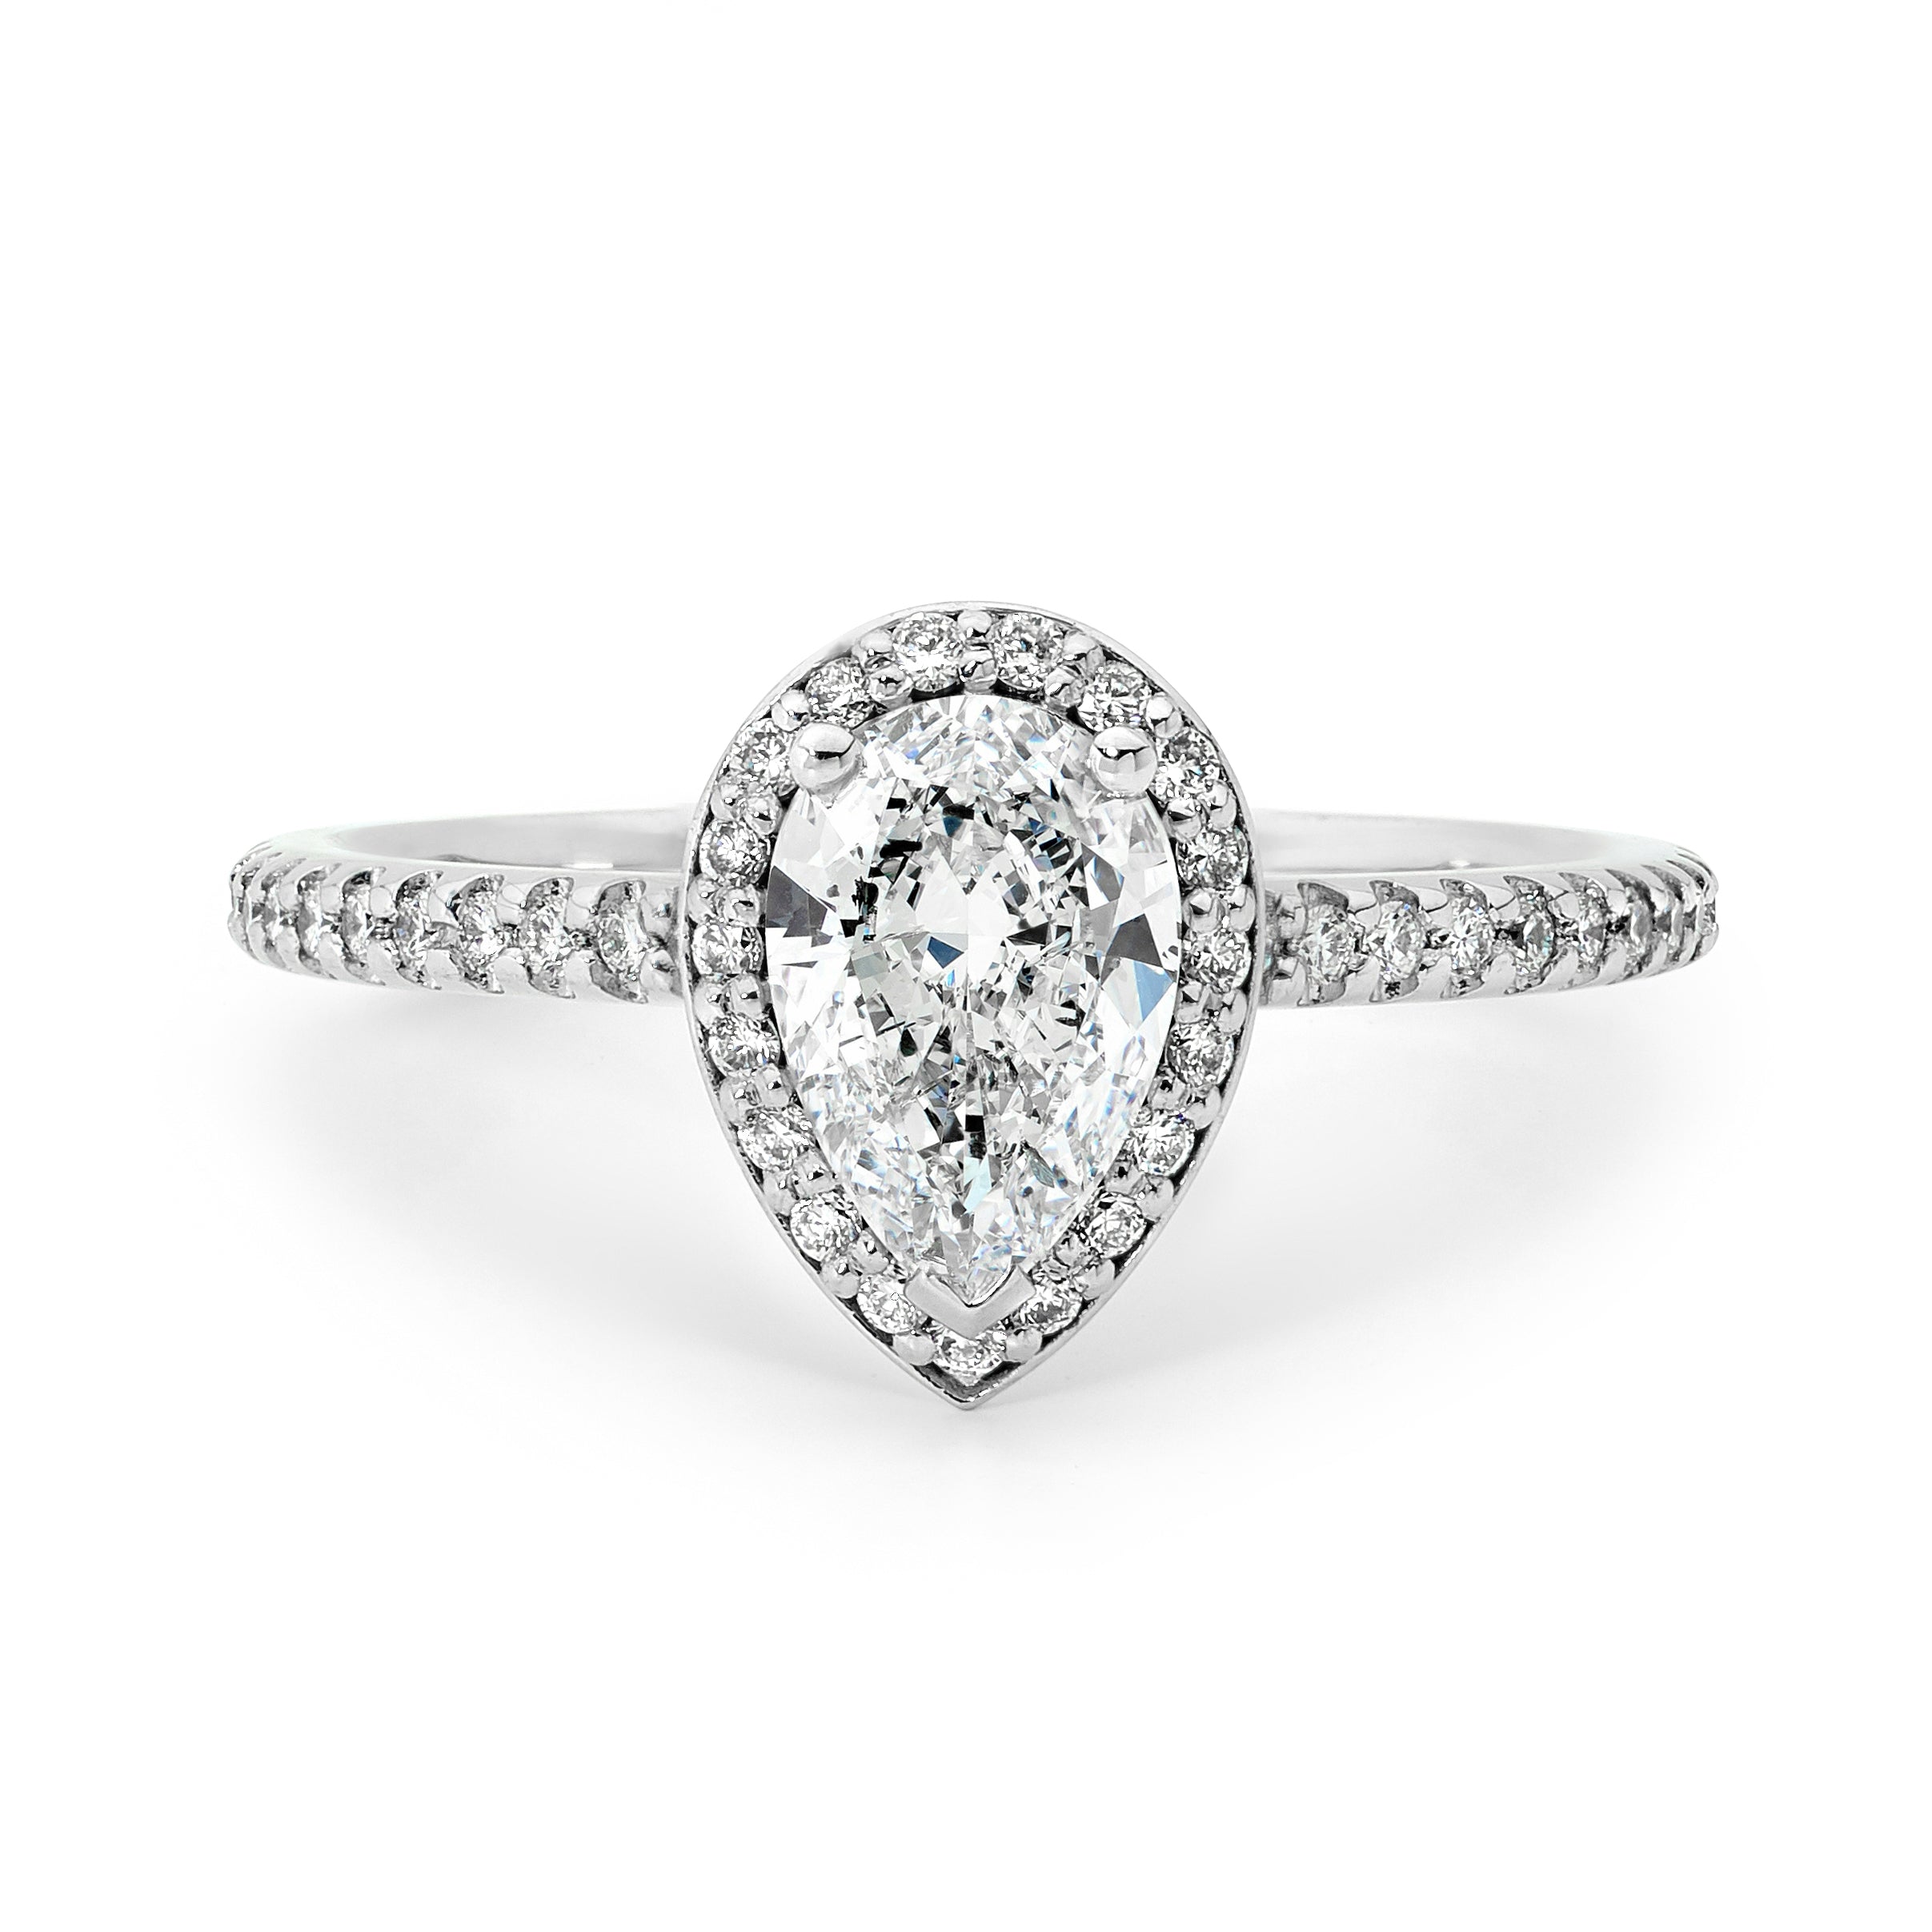 Asymmetric Blossom Engagement Ring with Pear Cut Diamonds